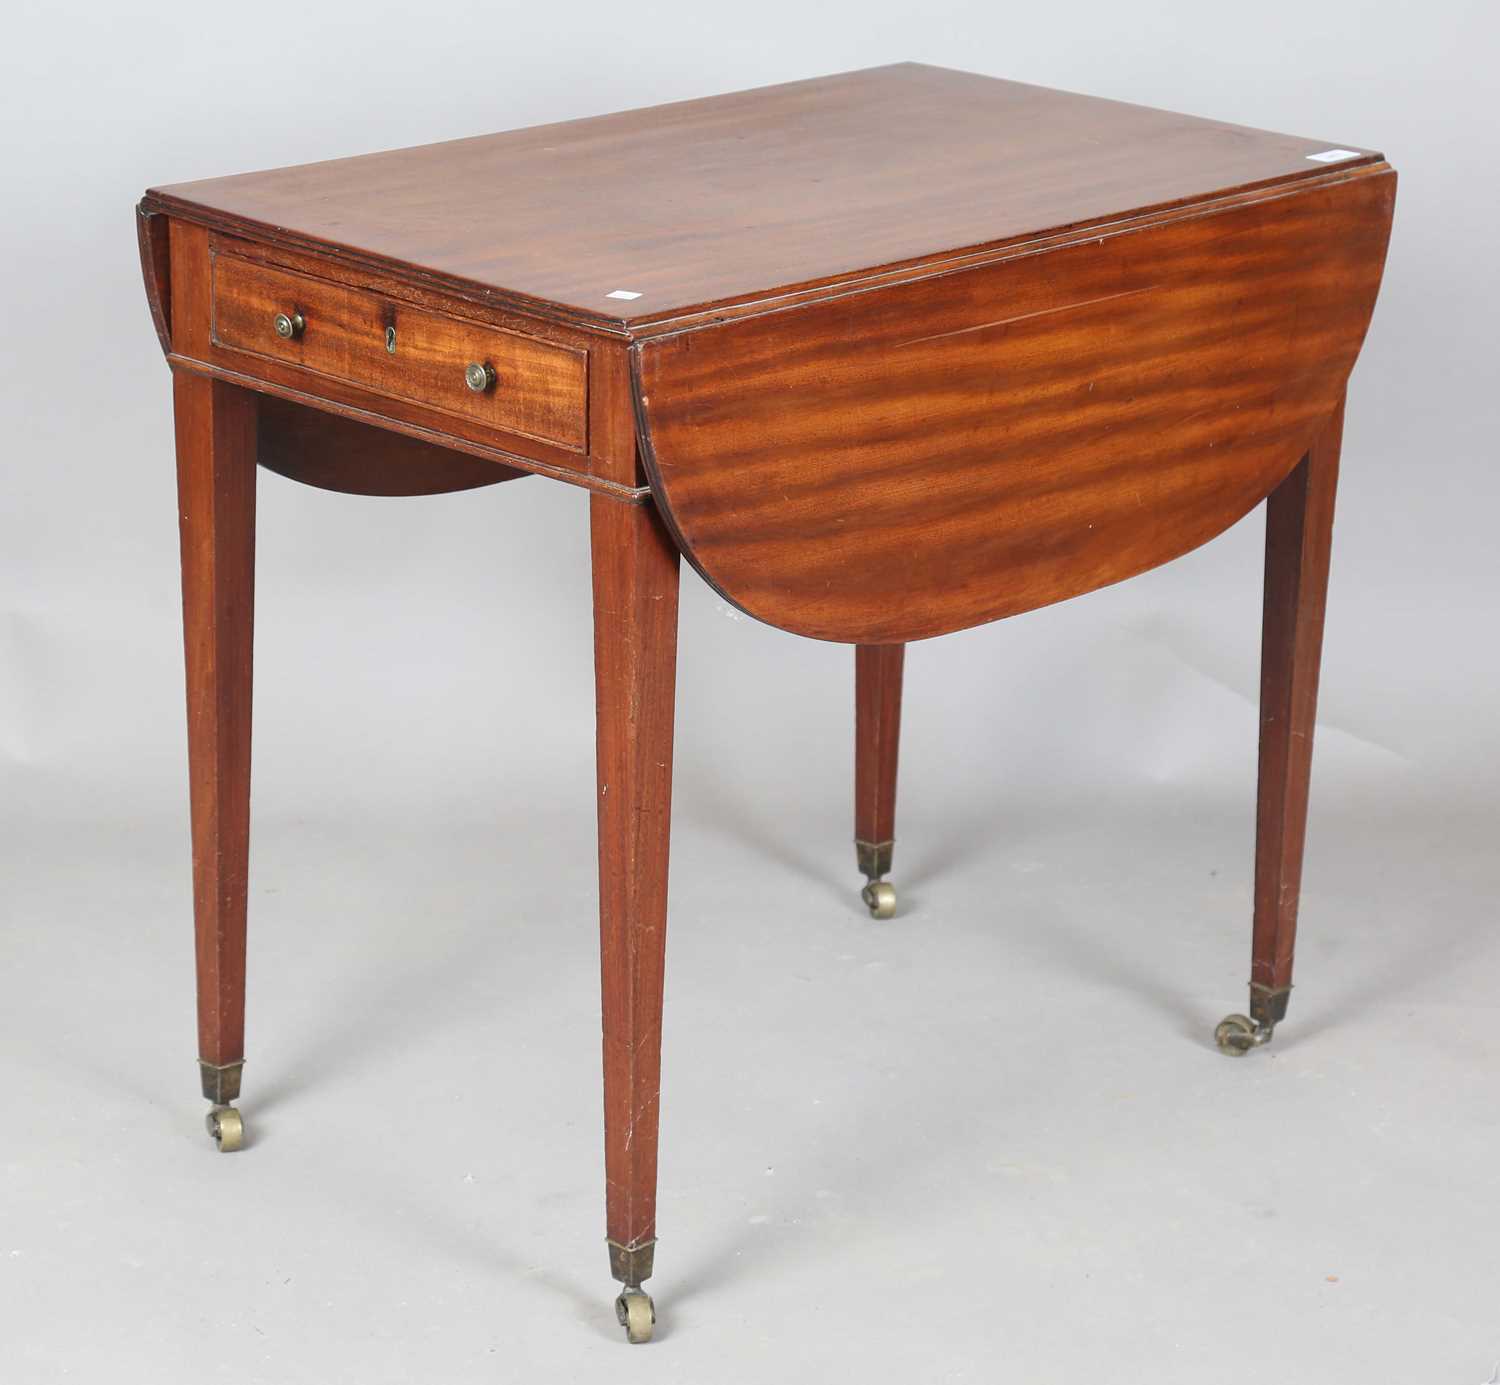 A late George III mahogany Pembroke table, fitted with a frieze drawer, on square tapering legs